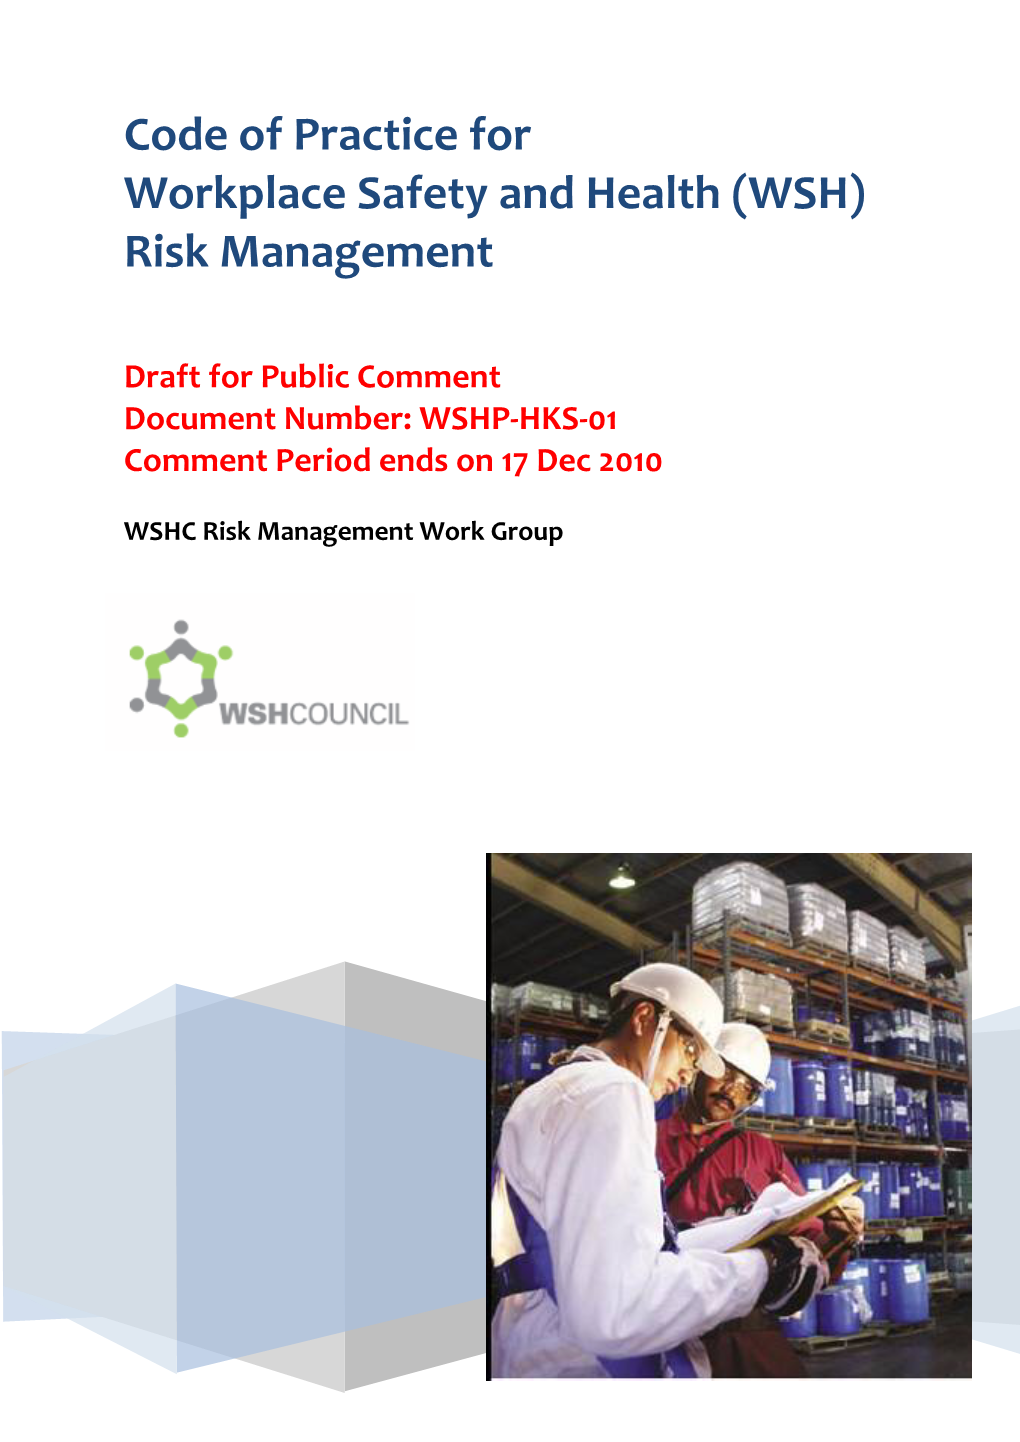 Code of Practice for Workplace Safety and Health (WSH) Risk Management